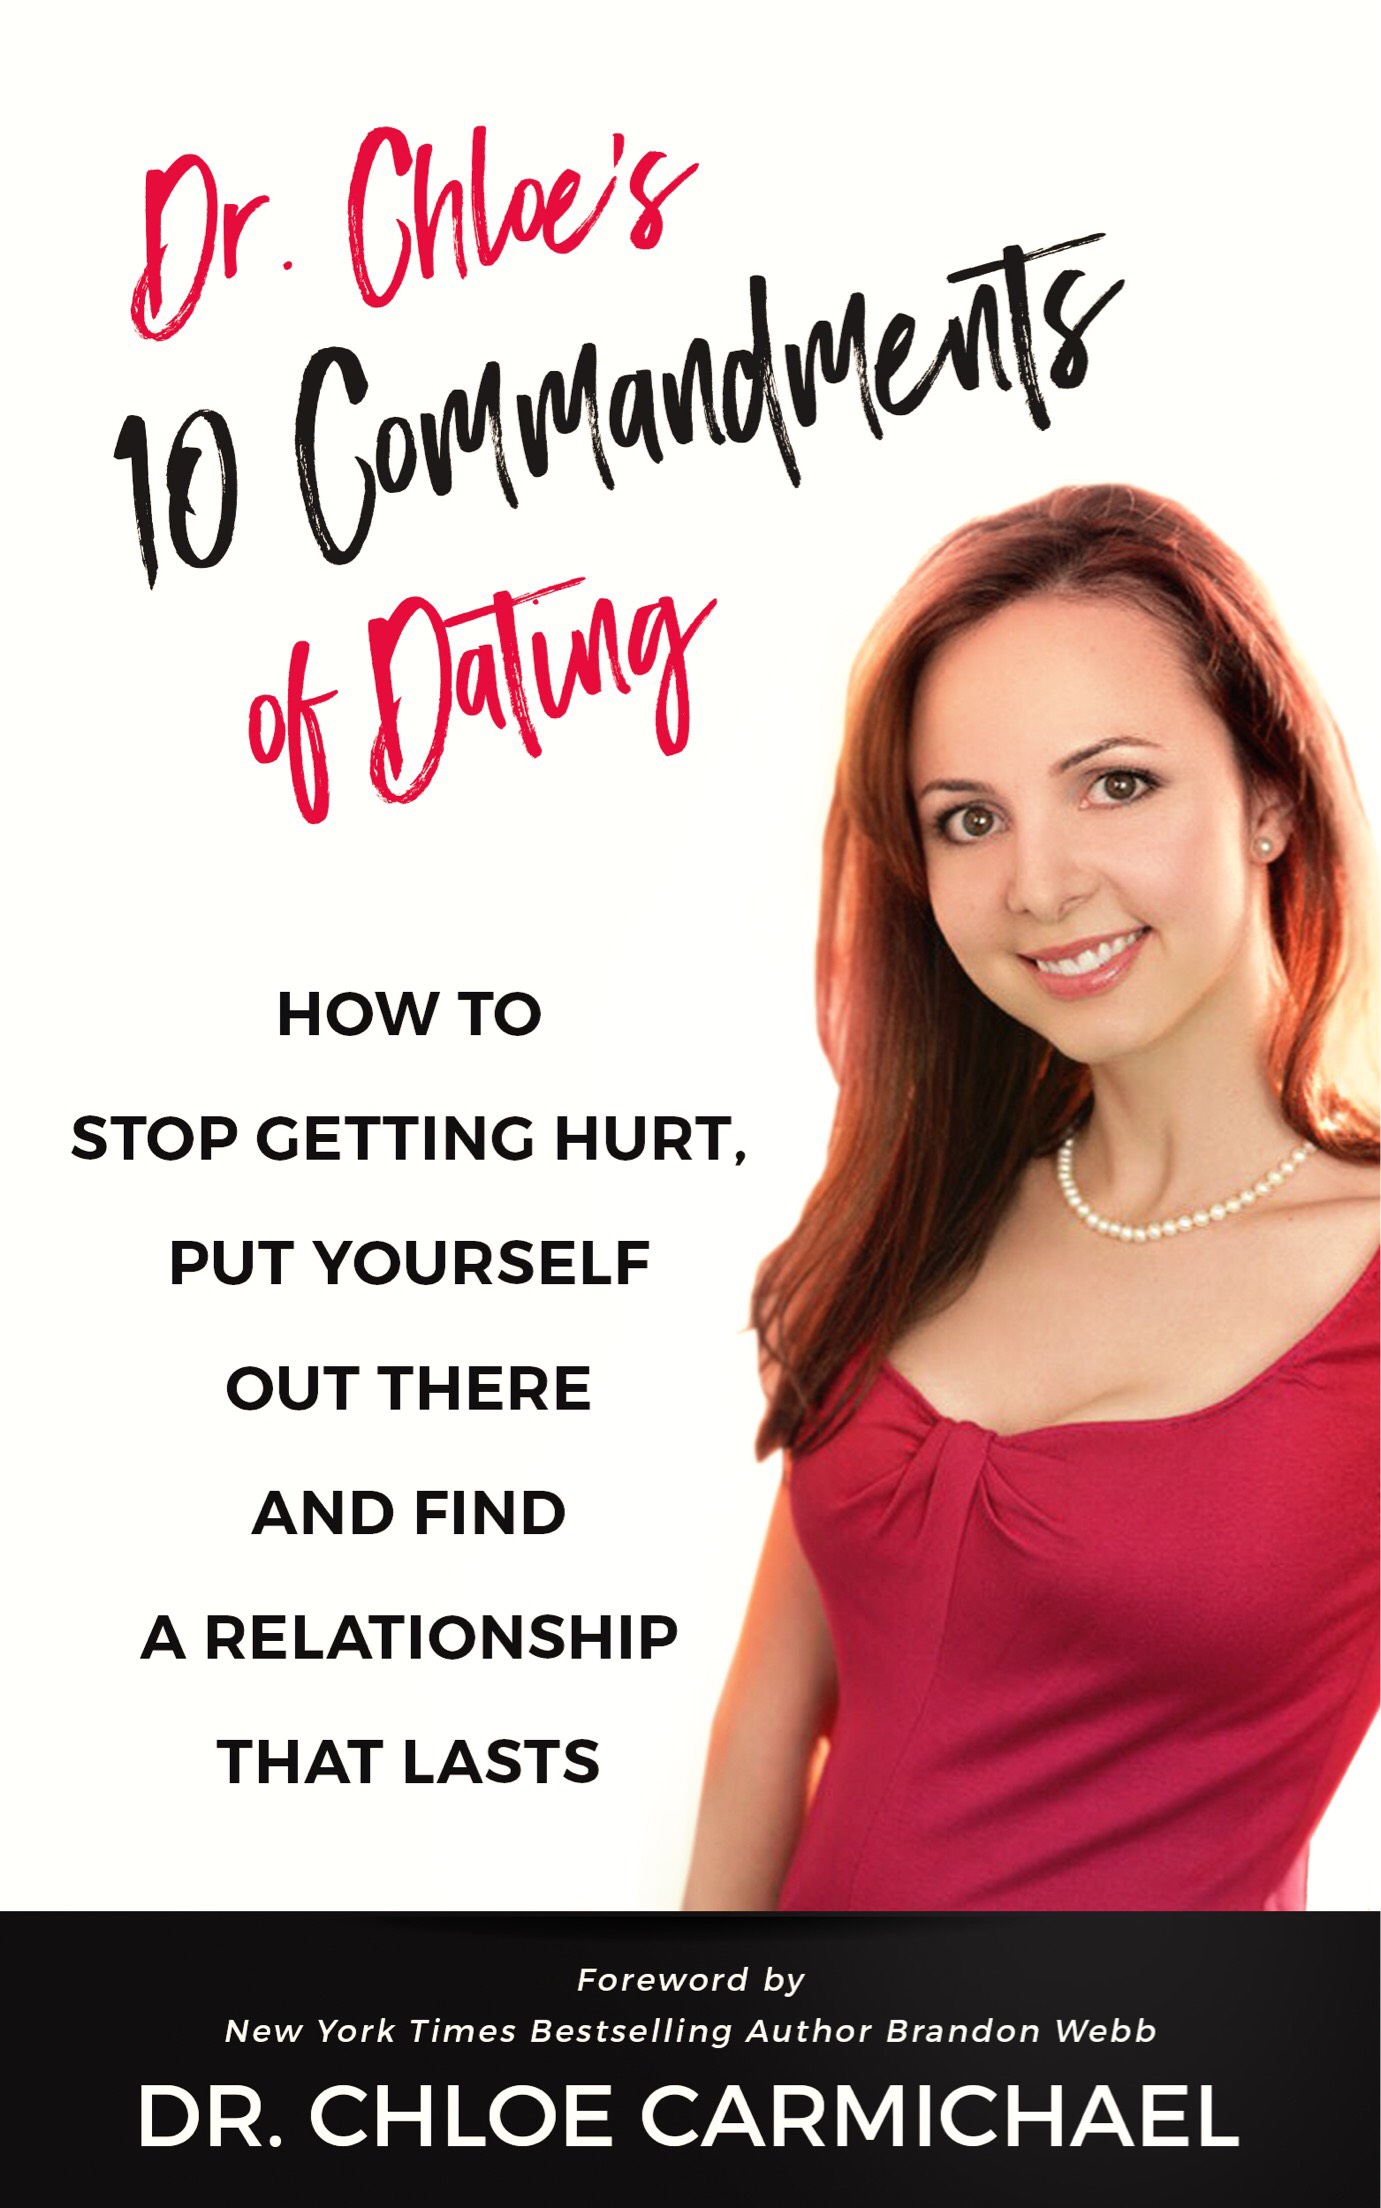 FREE: Dr. Chloe’s 10 Commandments of Dating: How to Stop Getting Hurt, Put Yourself Out There and Find a Relationship That Lasts by Dr. Chloe Carmichael